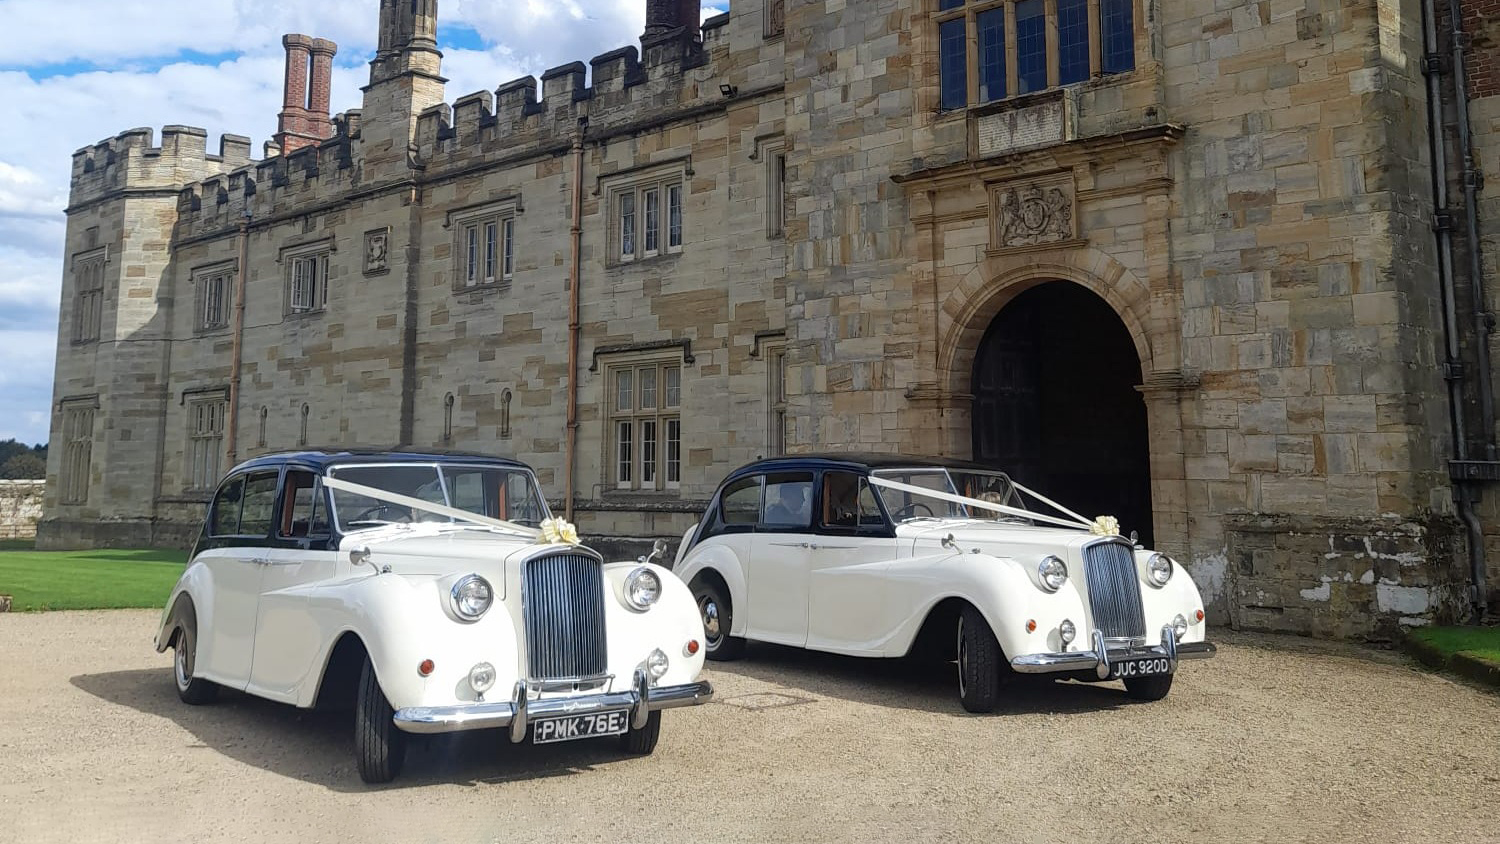 Two Classic Austin Princess Limousine decorated with Ivory Ribbons and Bows on top of the front grill. Vehicles are parked in front of a large manor house in Rochester